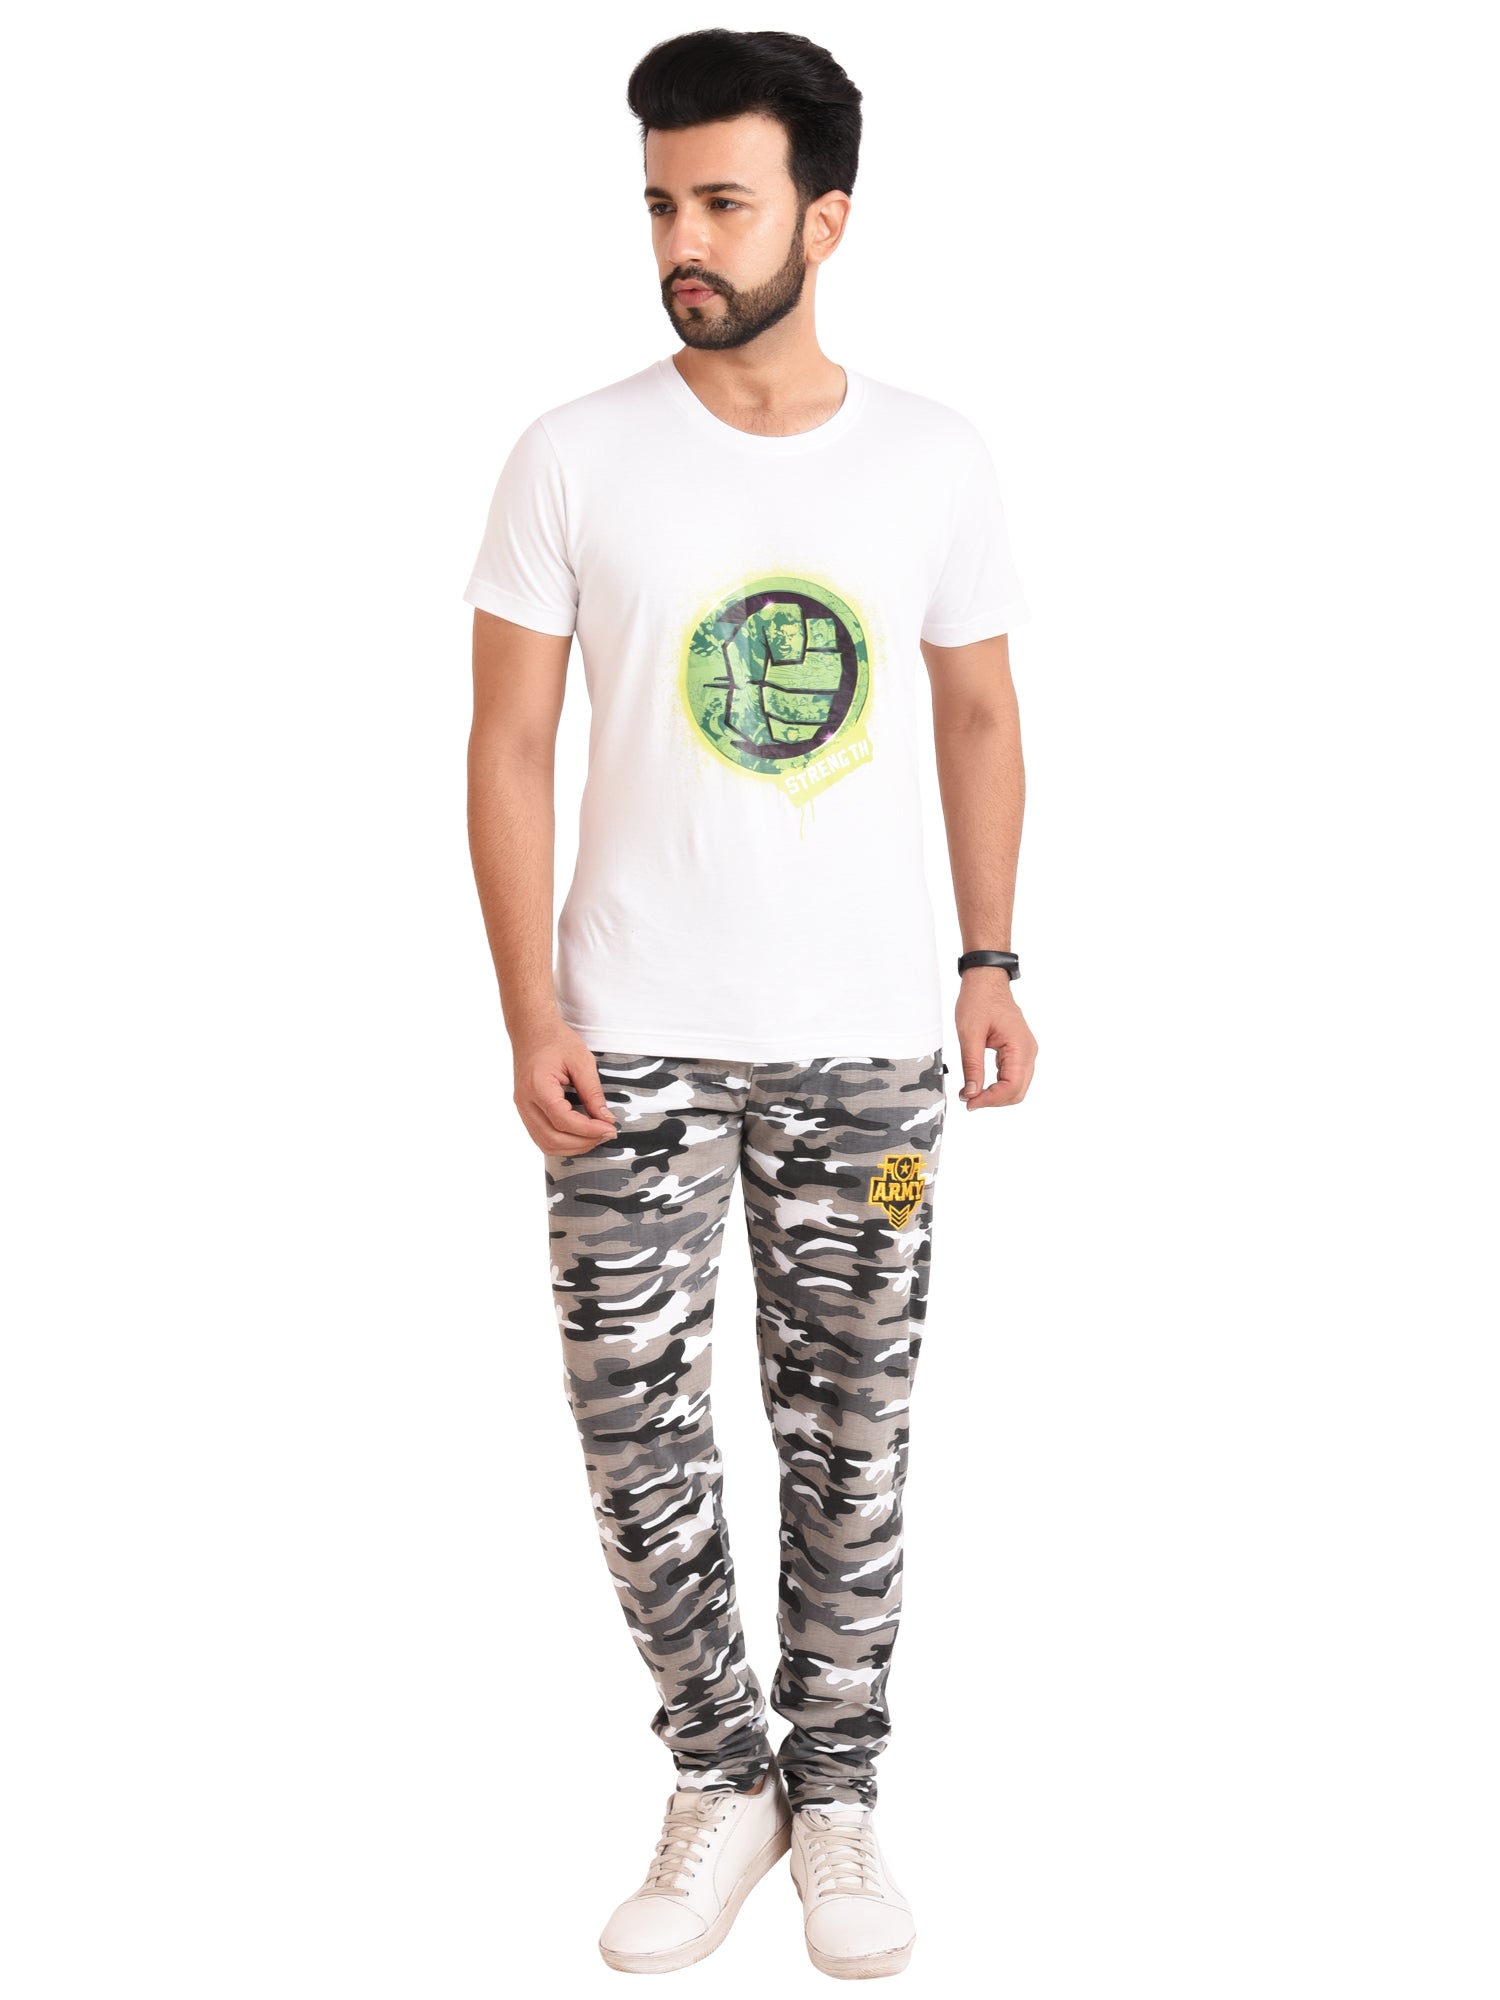 Buy  camo pants with white shirt  Very cheap 